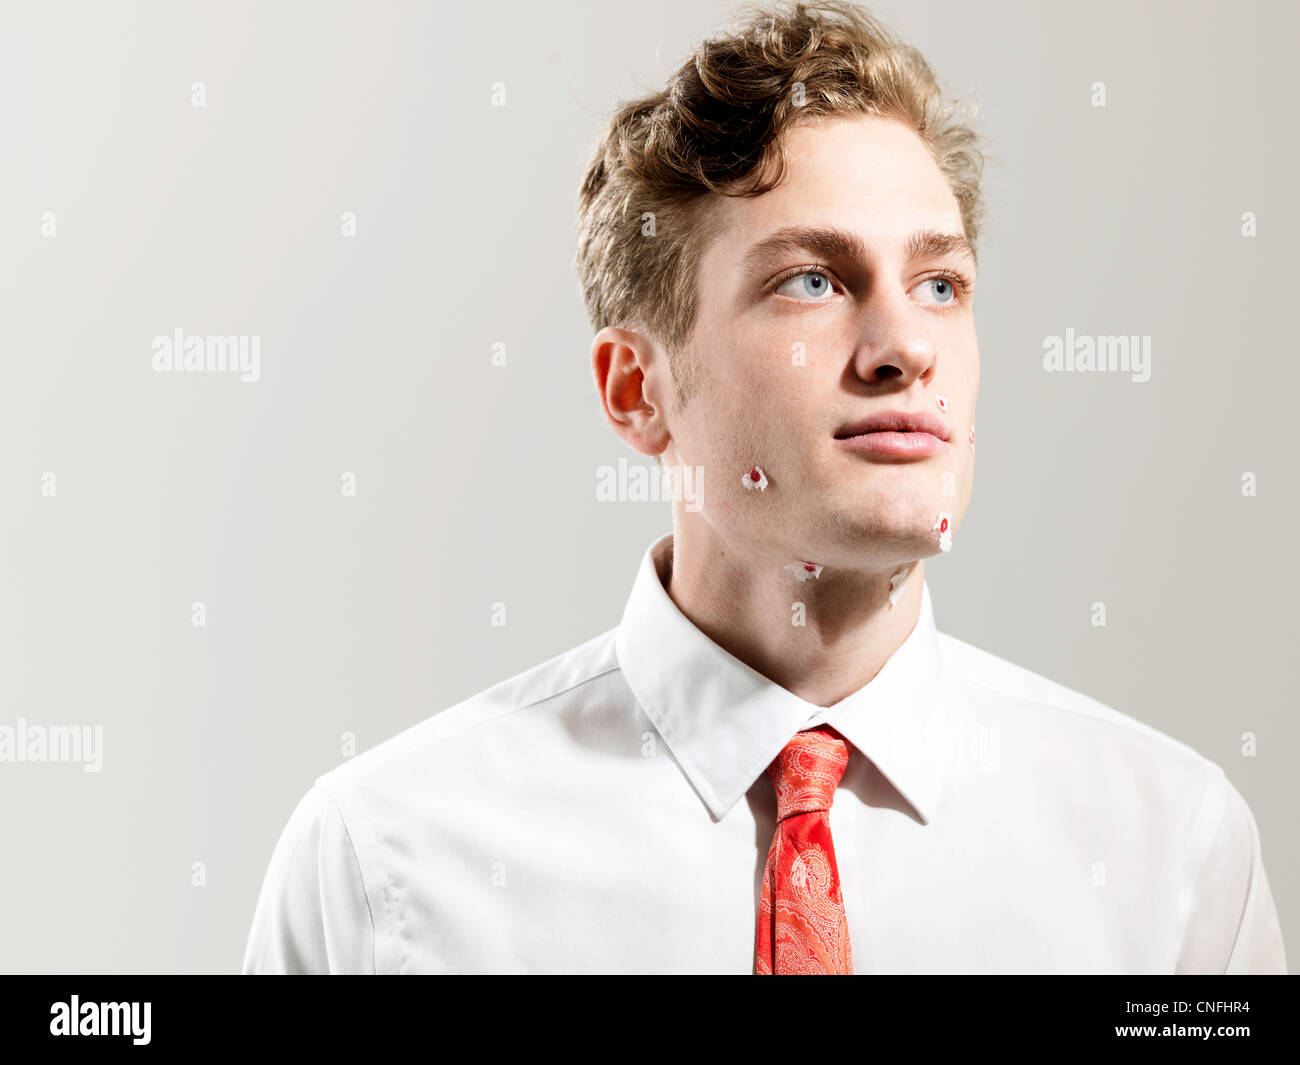 Young man with shaving marks, studio shot Stock Photo